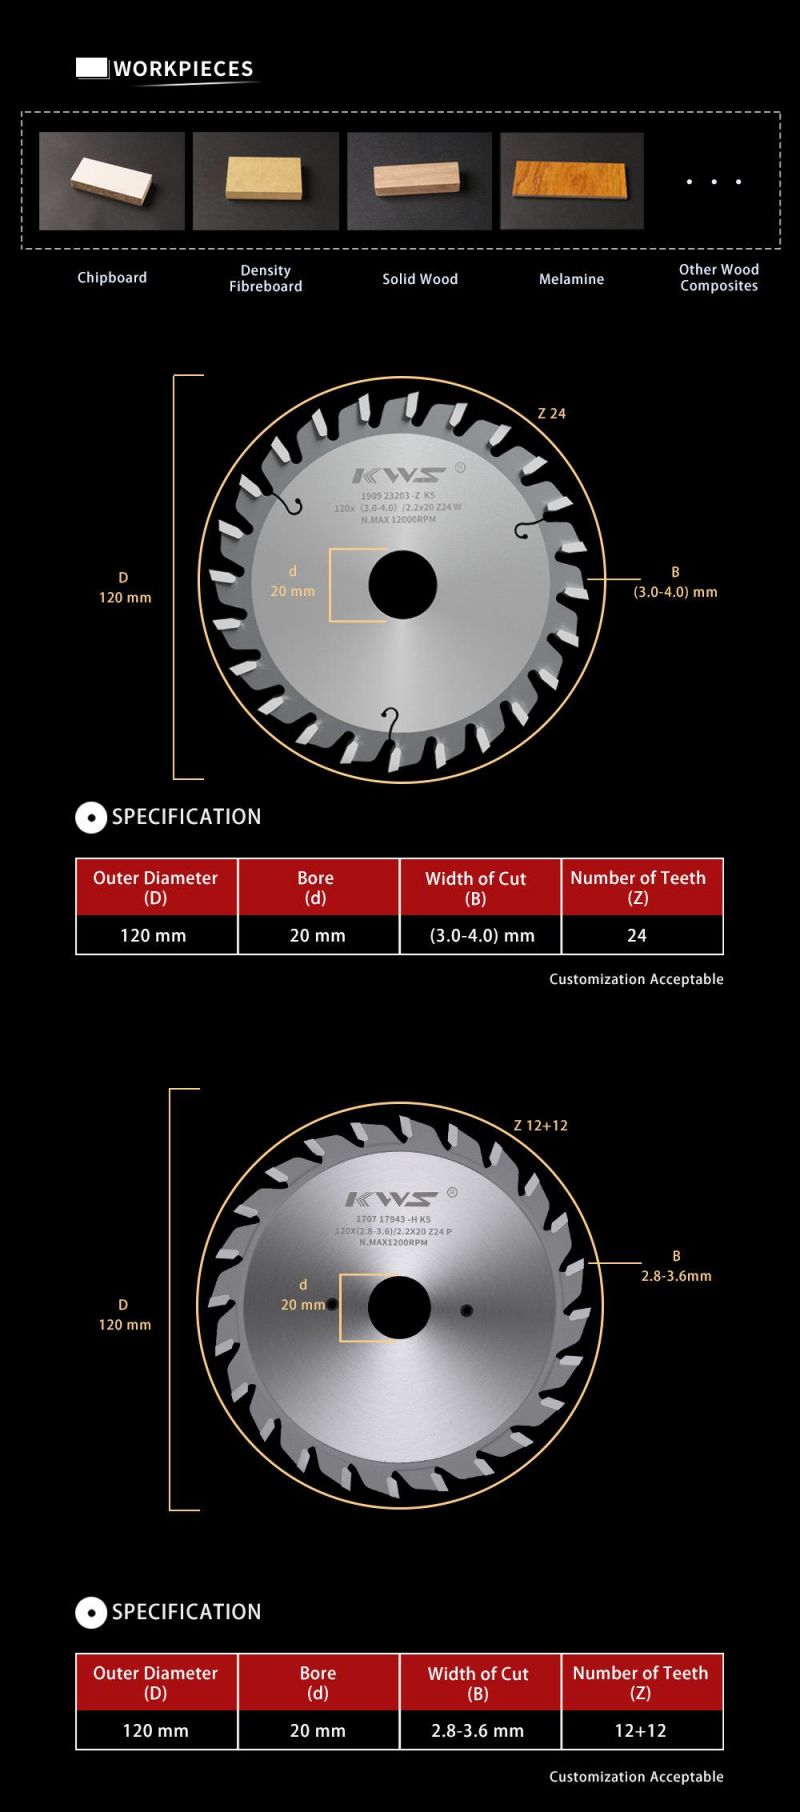 Tct Adjustable Scoring Saw Blade with Chrome Surface Treating